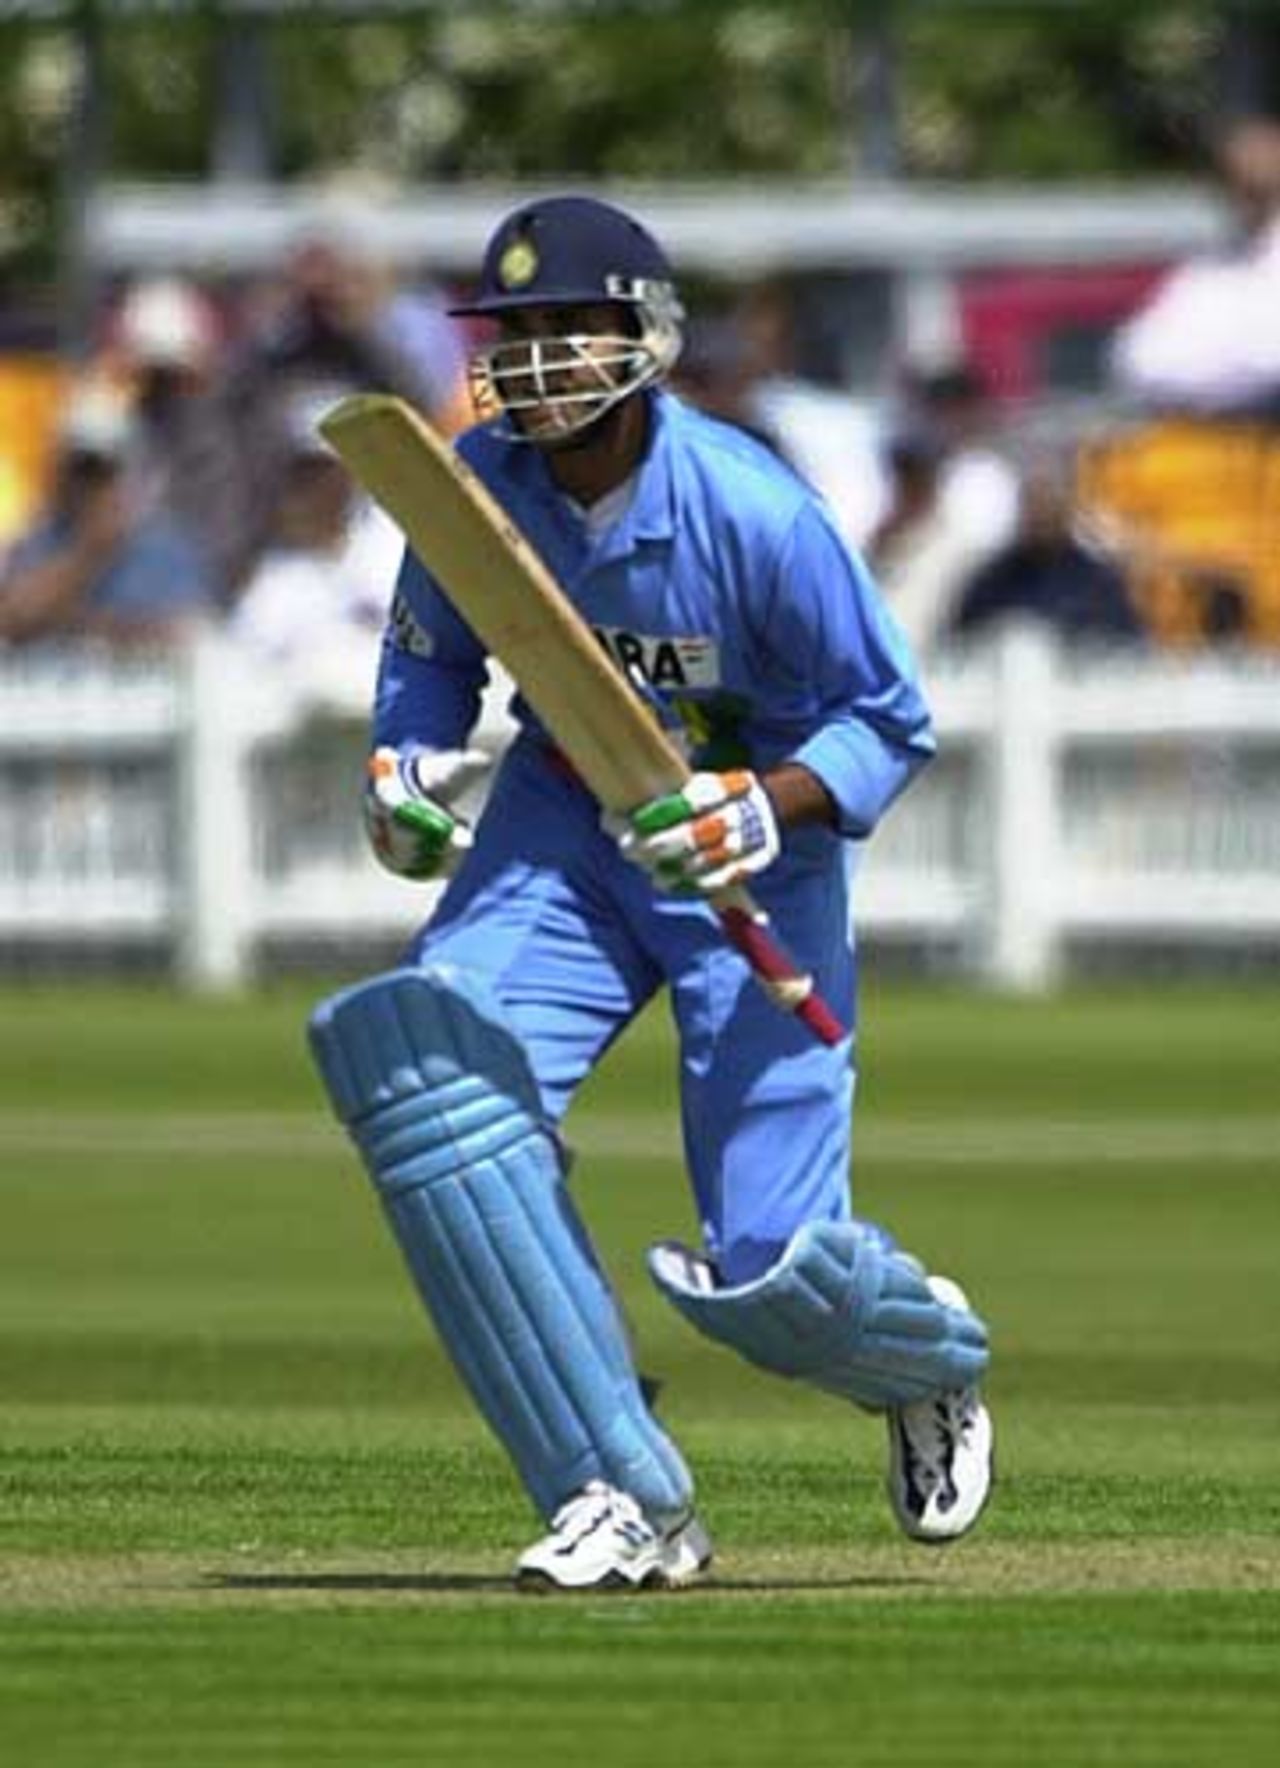 Ganguly advances to a rapid score of 68, Leicestershire v Indians 26th June 2002